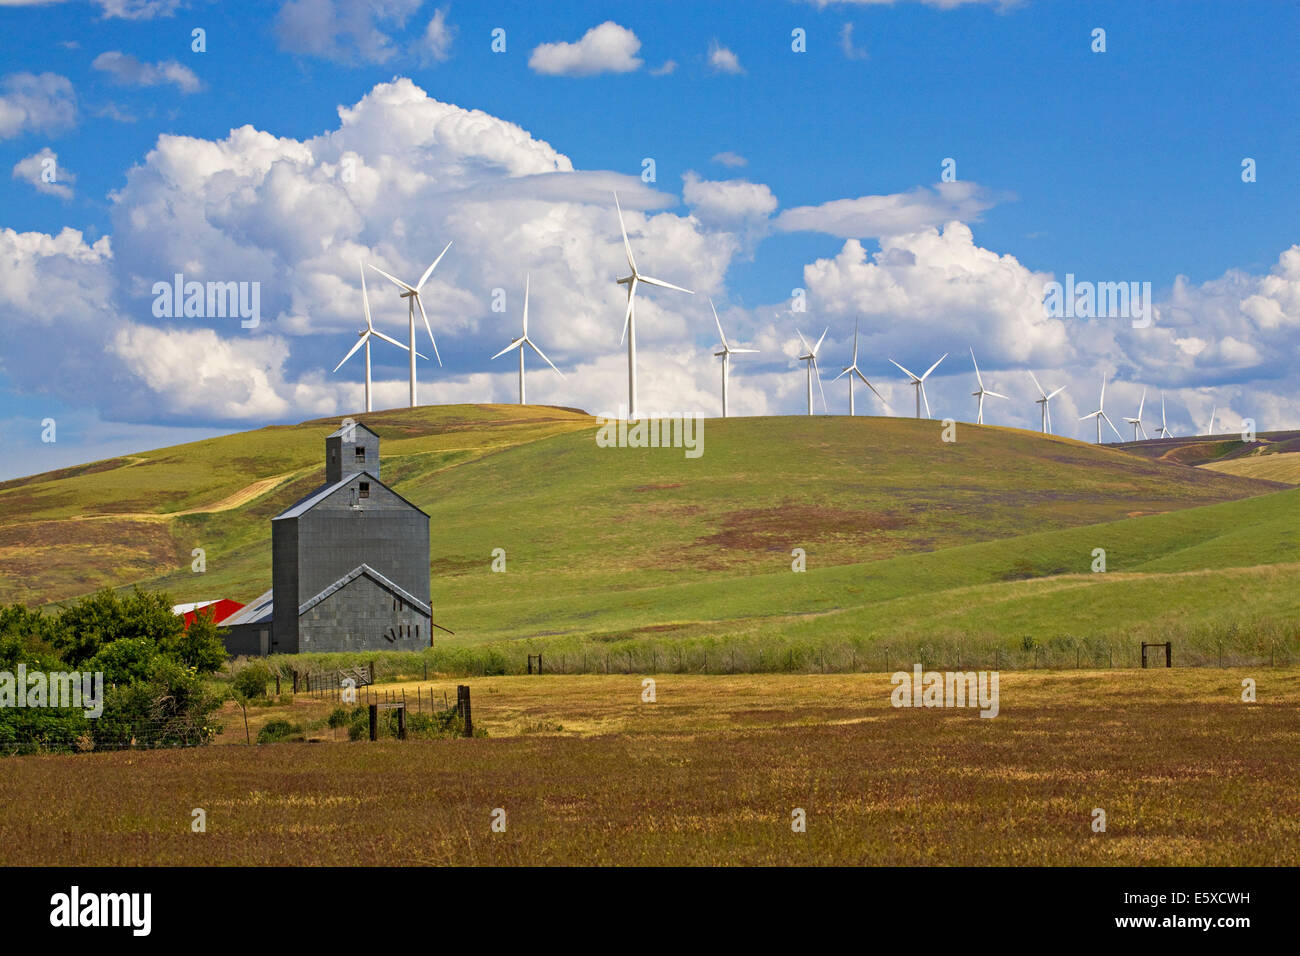 A farm and wheat silo overshadowed by wind turbines in the remote Palouse Empire region,  a farming and wheat growing region of eastern Washington. Stock Photo